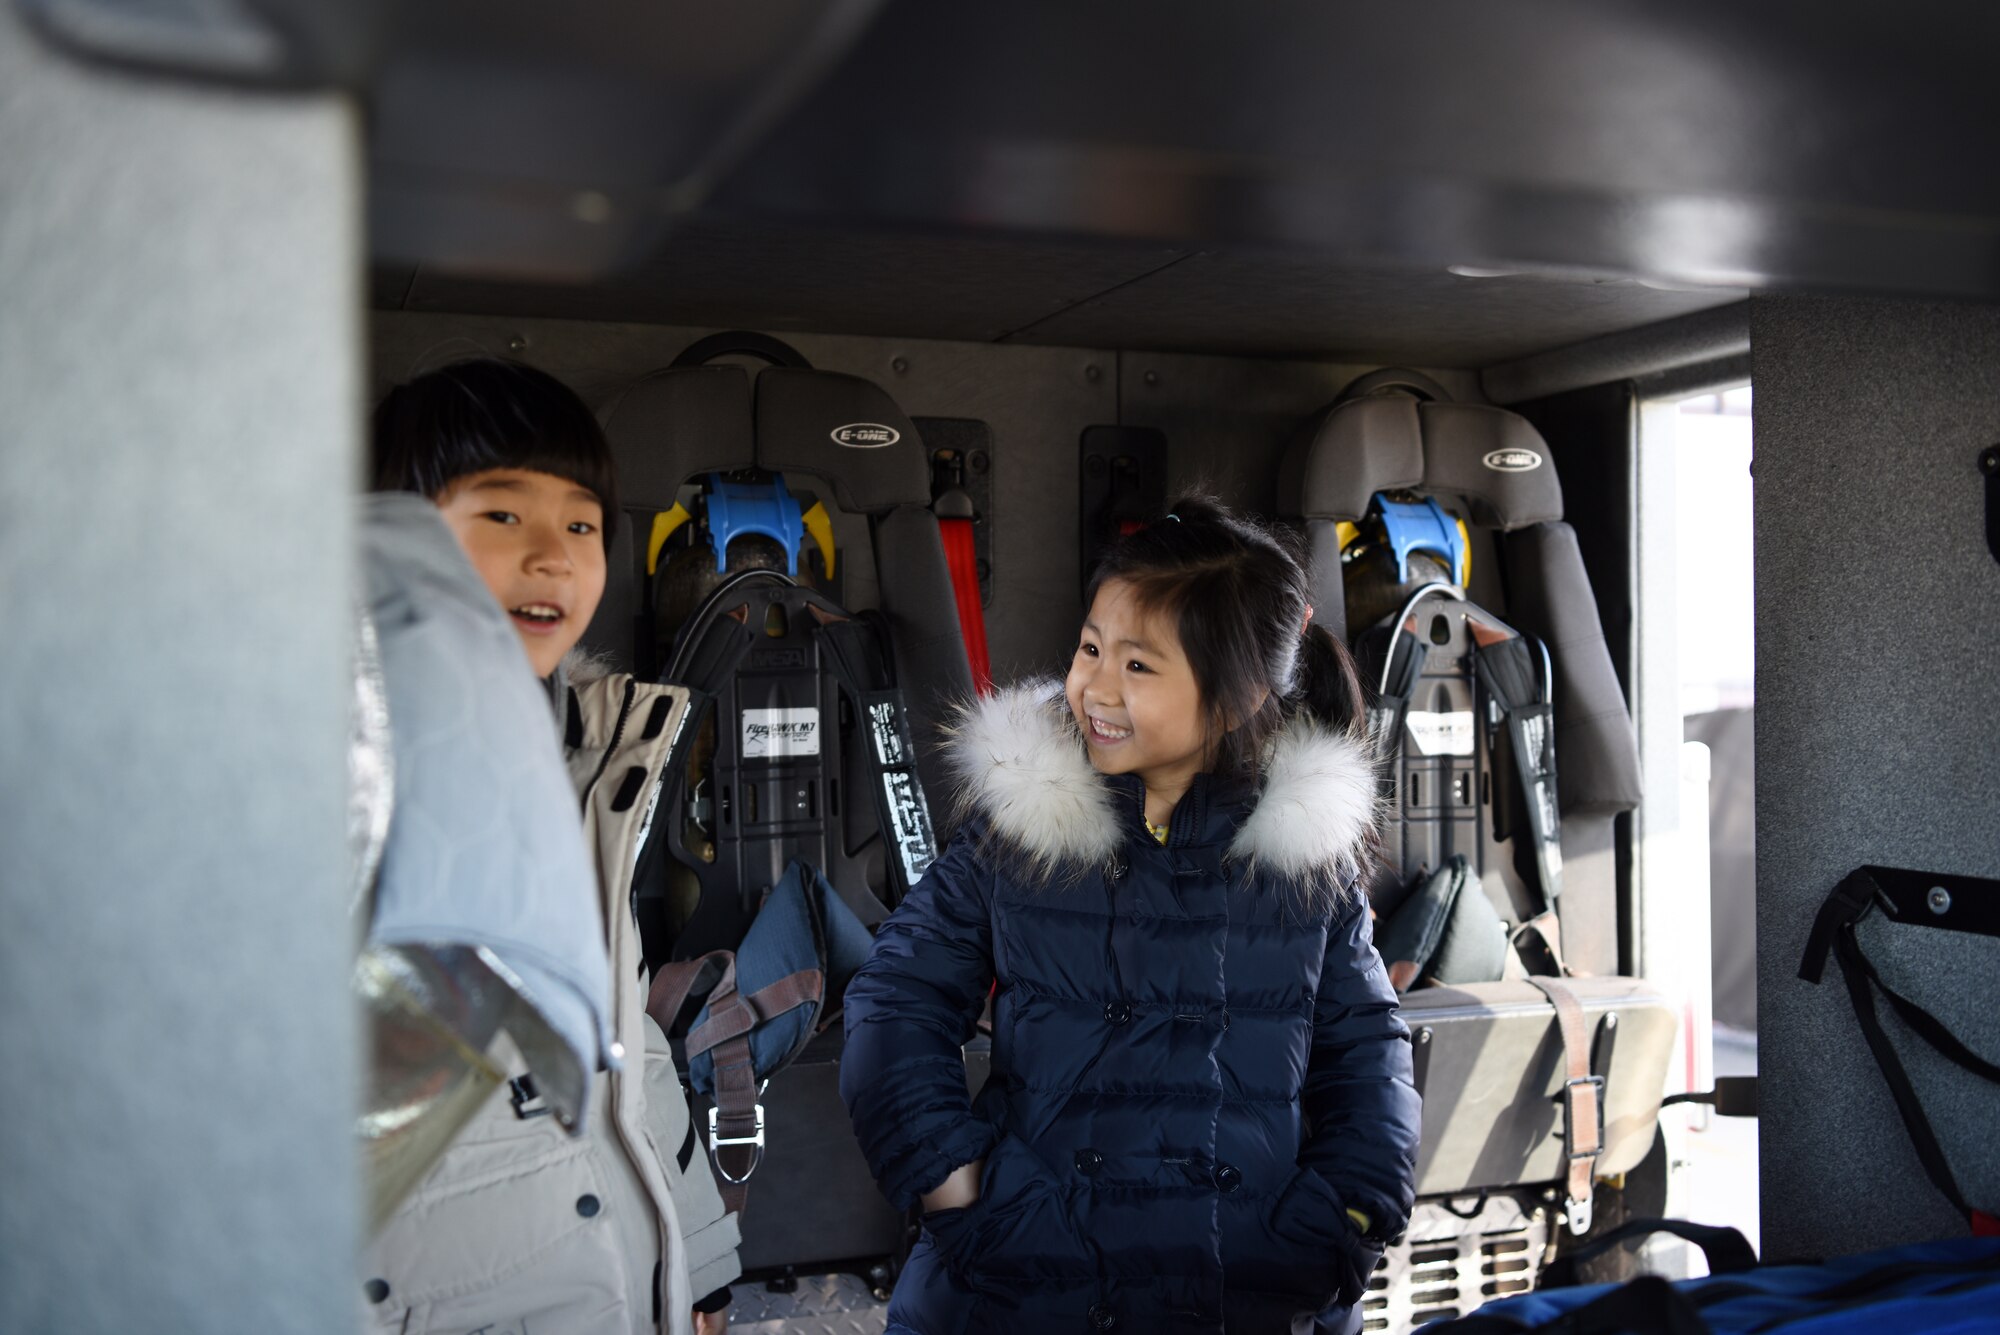 Jin-yong Jeong and Yun-seo Du, Korean Christian International School students, explore the back of a fire truck at Kunsan Air Base, Republic of Korea, Nov. 30, 2018. The Korean Christian International School came to base to tour the fire station and meet with firefighters. (U.S. Air Force photo by Staff Sgt. Joshua Edwards)